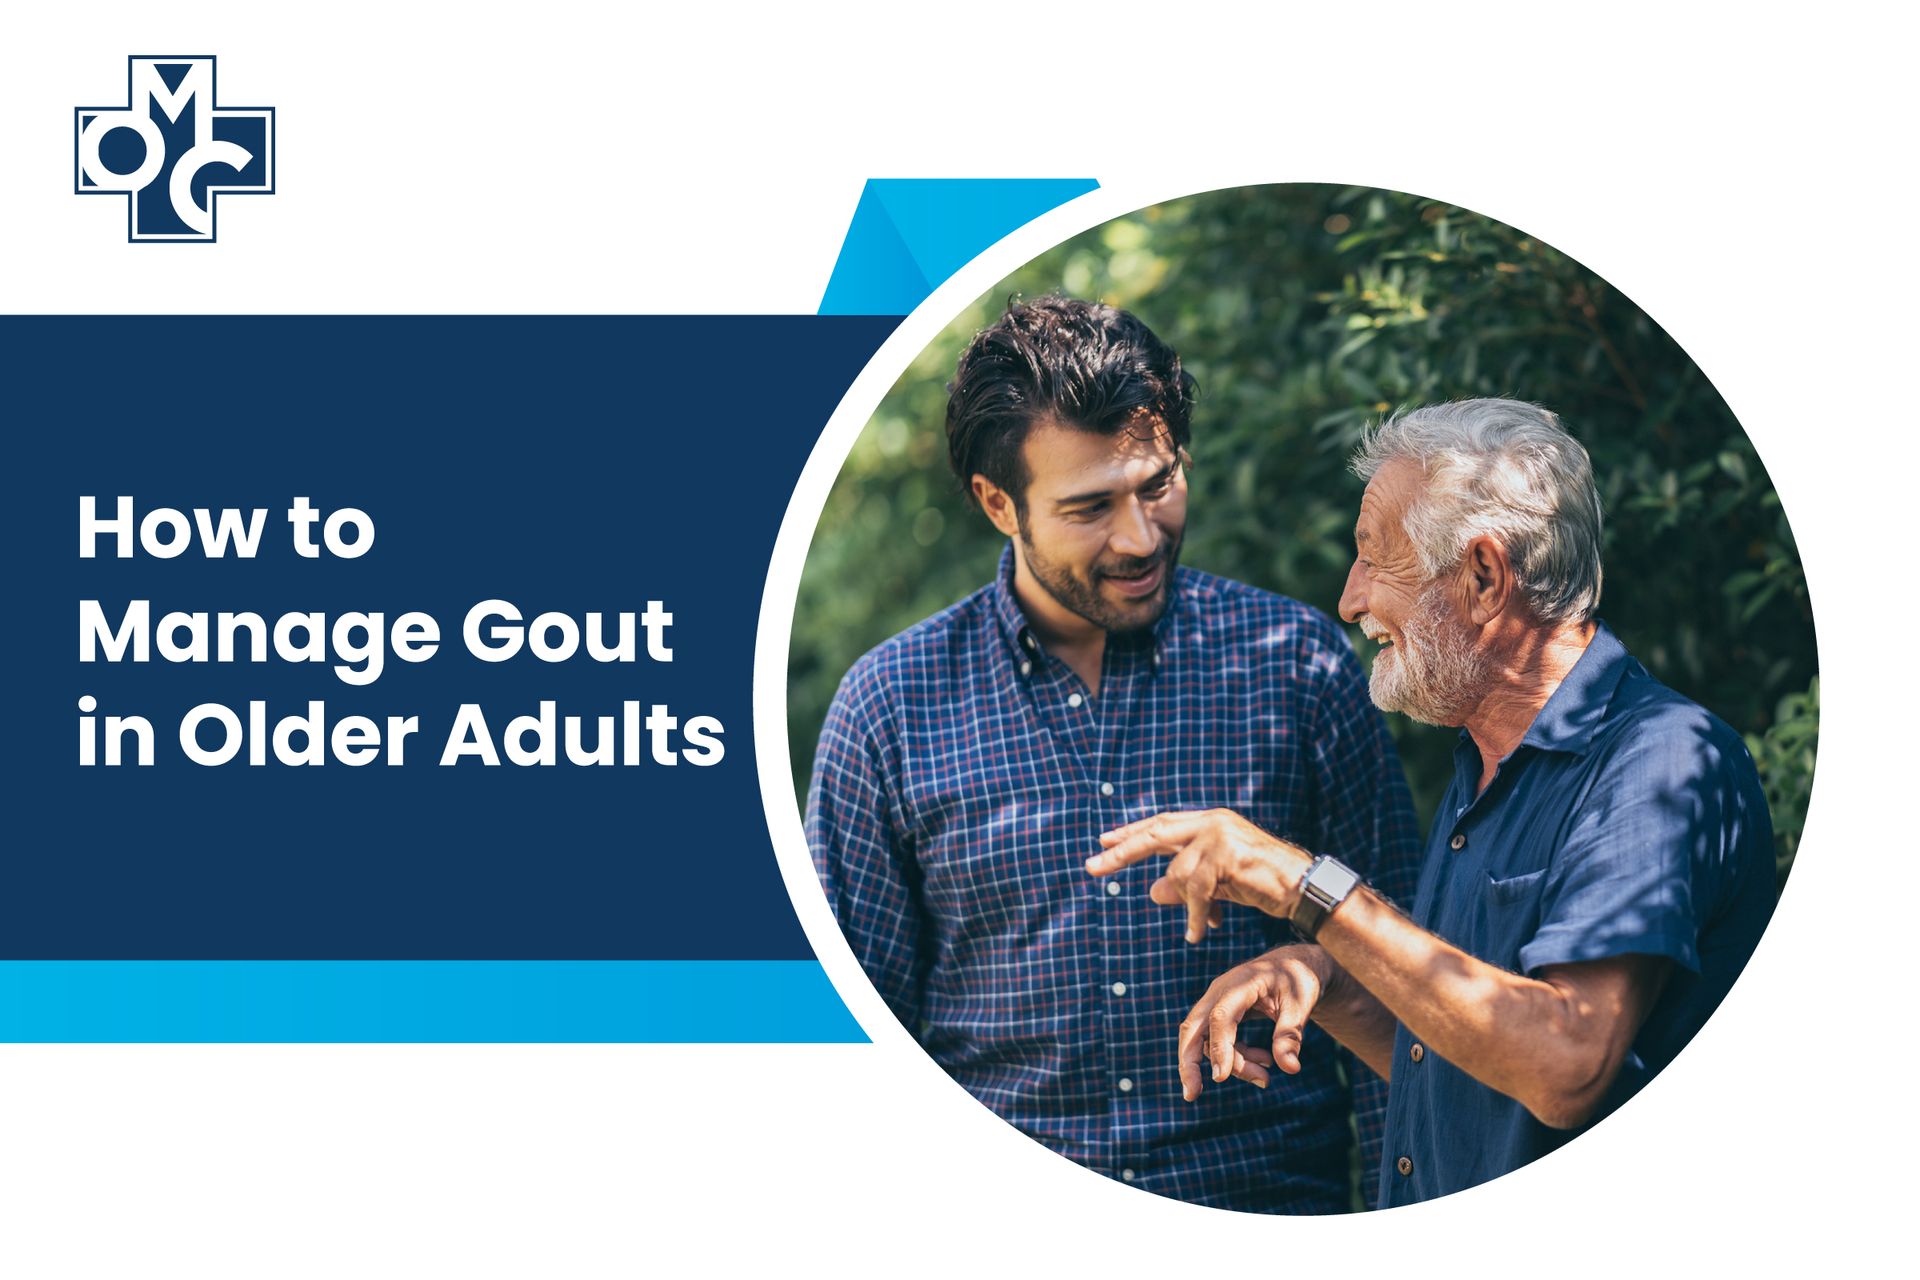 How to Manage Gout in Older Adults